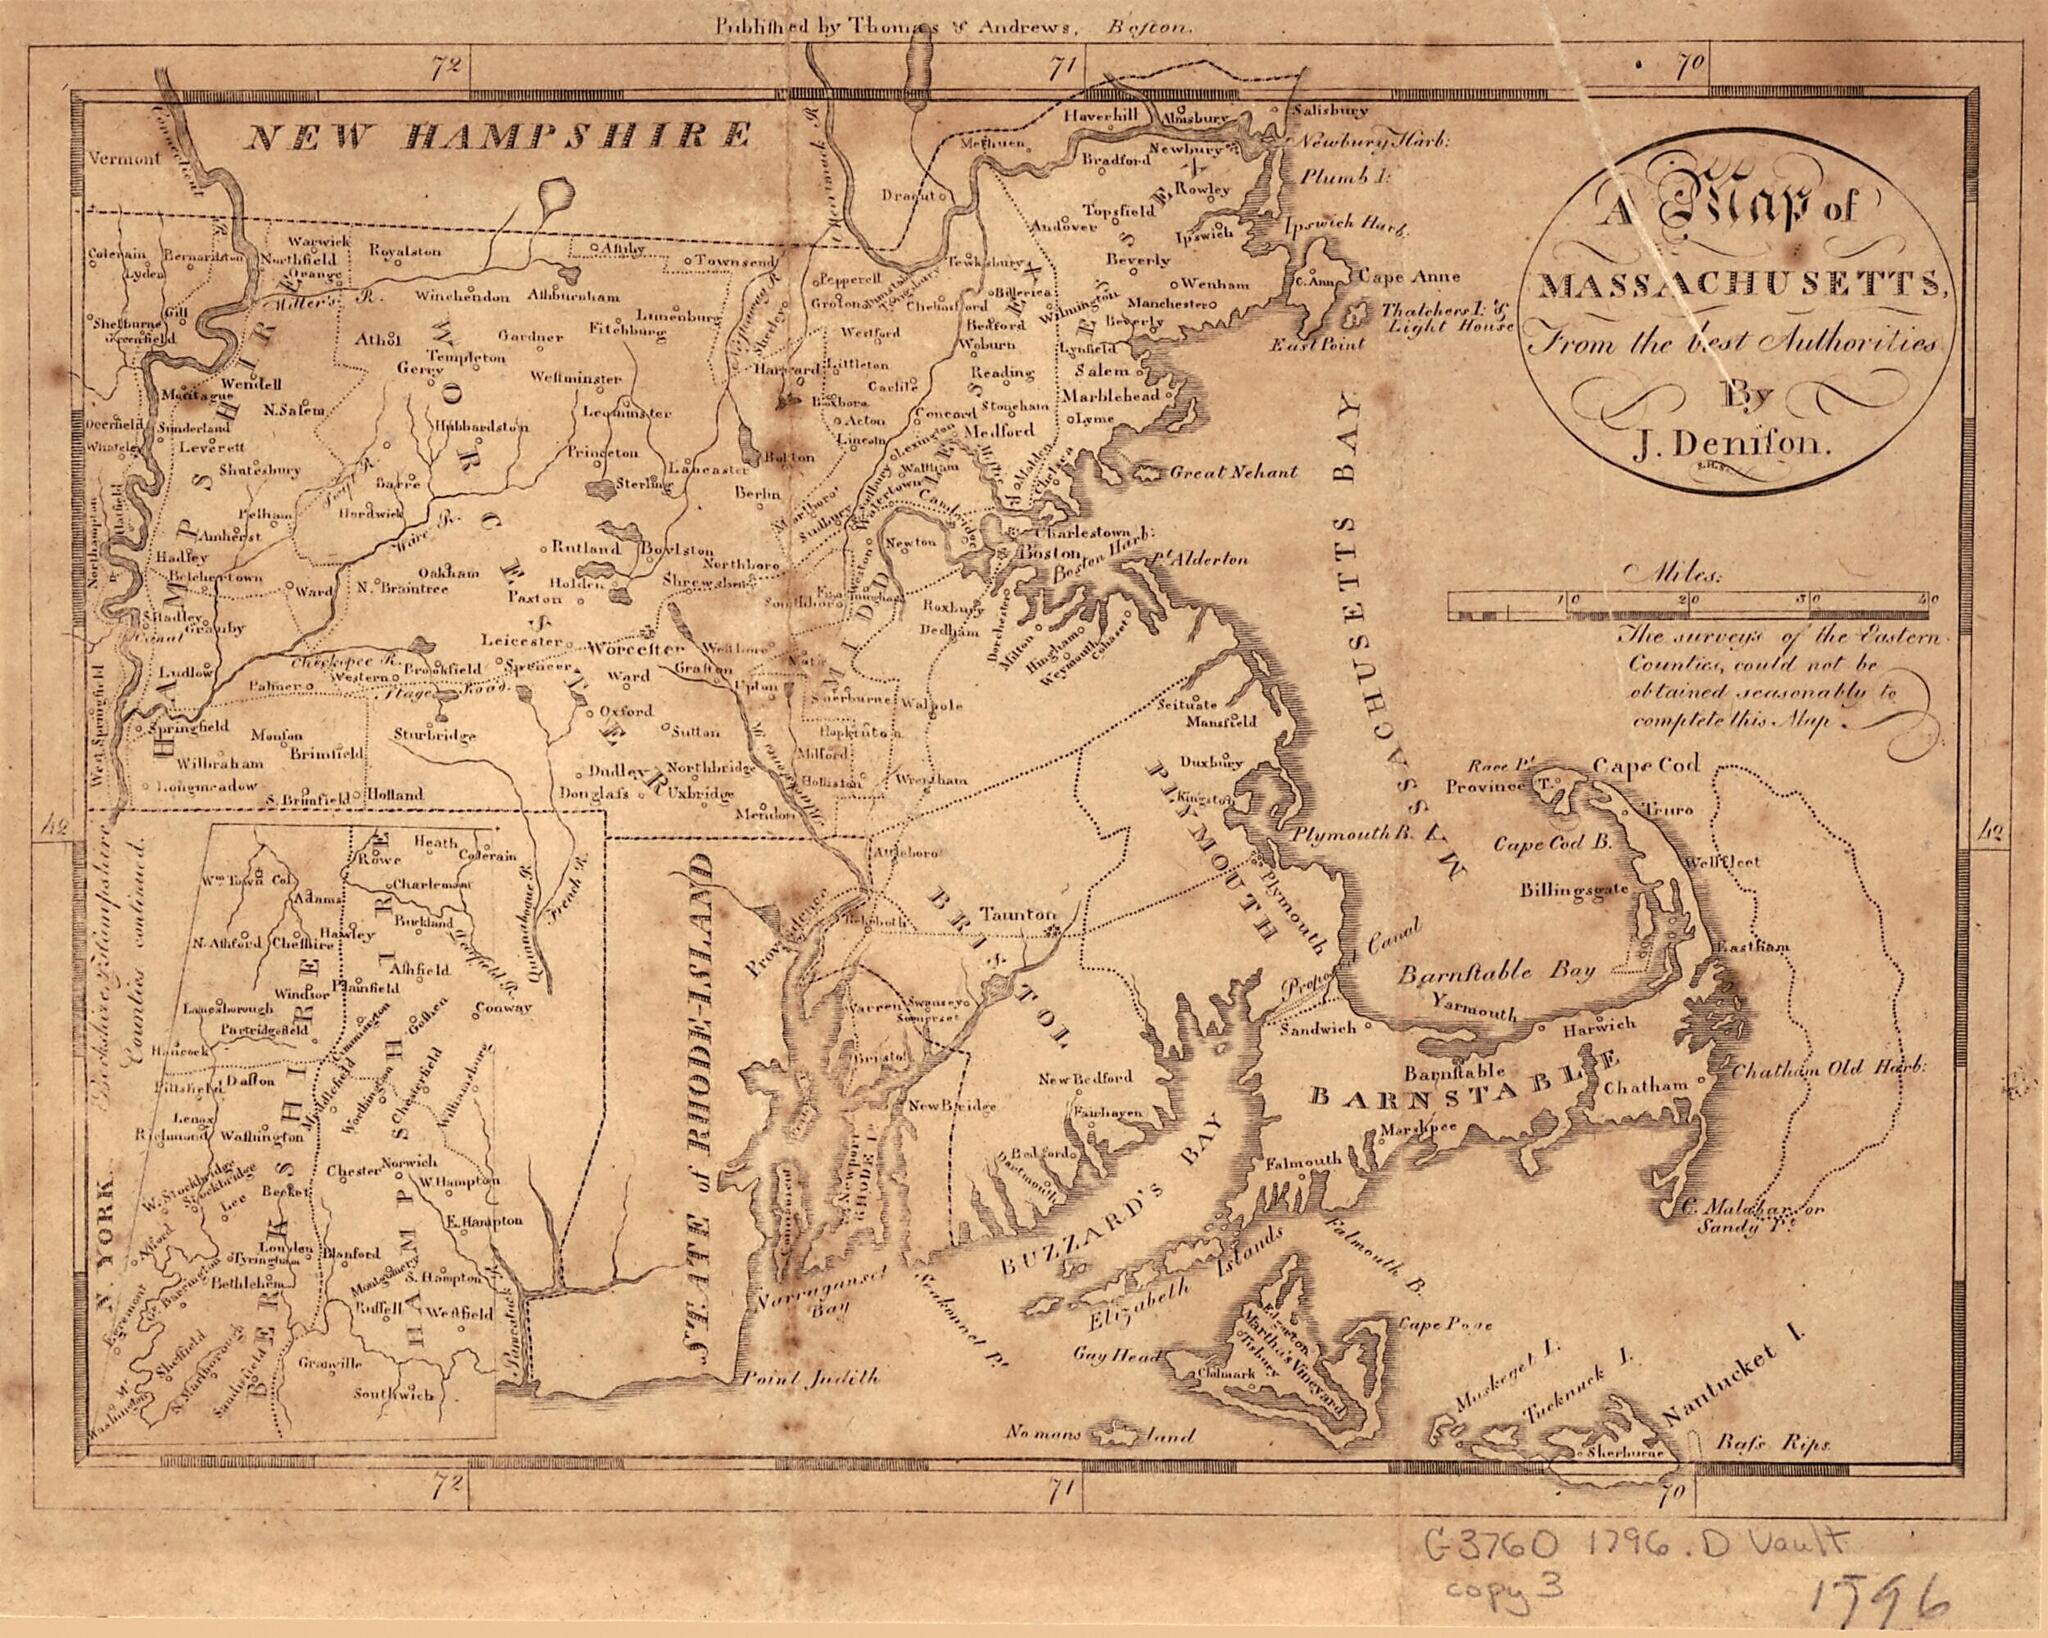 This old map of A Map of Massachusetts : from the Best Authorities from 1796 was created by J. Denison, Samuel Hill, Jedidiah Morse in 1796